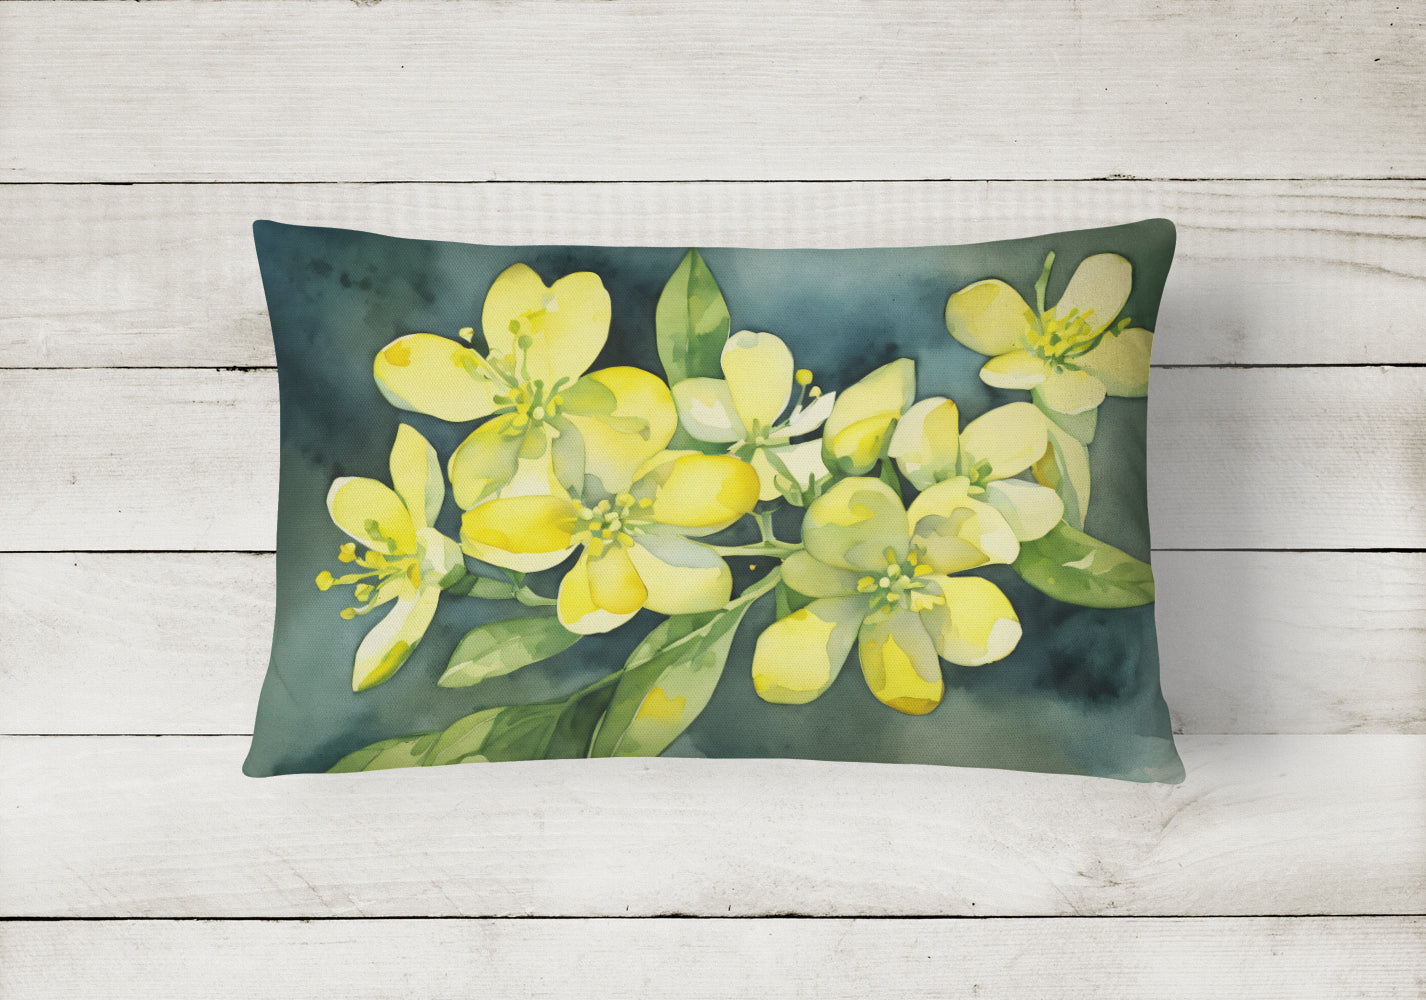 Buy this South Carolina Yellow Jessamine in Watercolor Fabric Decorative Pillow